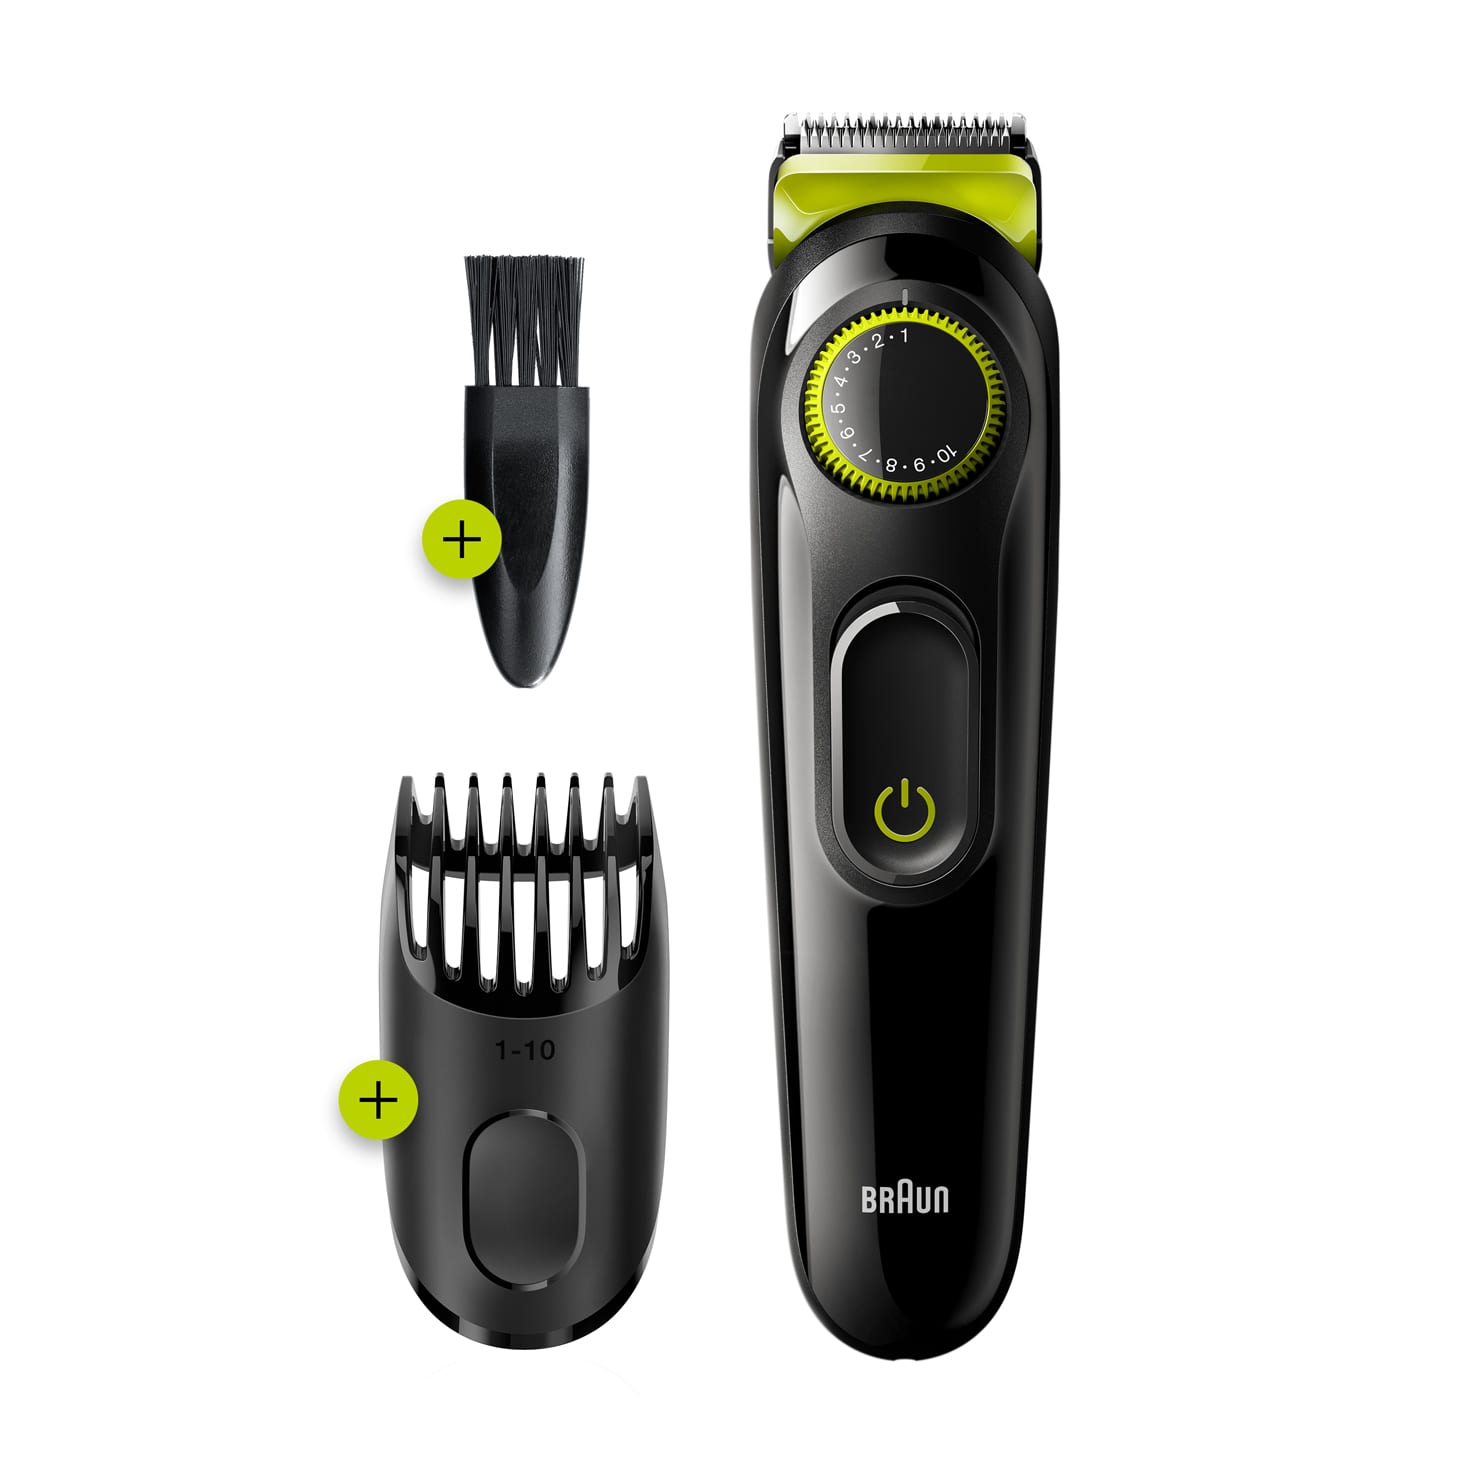 Beard Trimmer Bt3221 With Precision Dial And 1 Comb